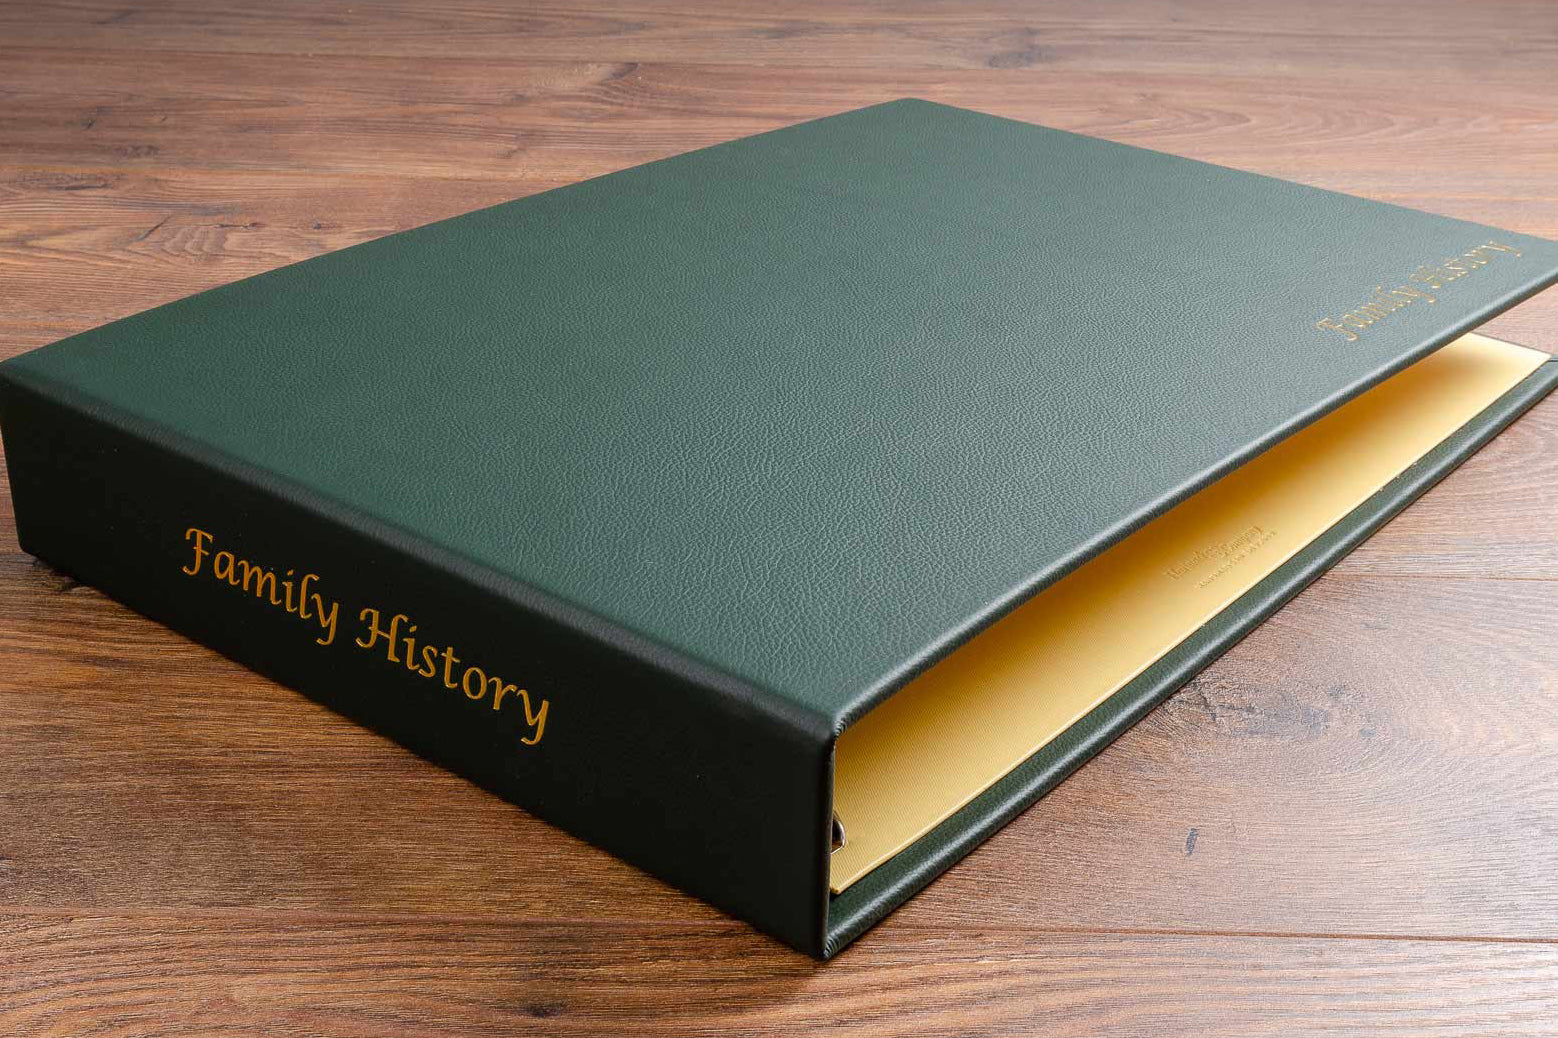 Bespoke made family history binder with gold foil stamping on cover and spine 